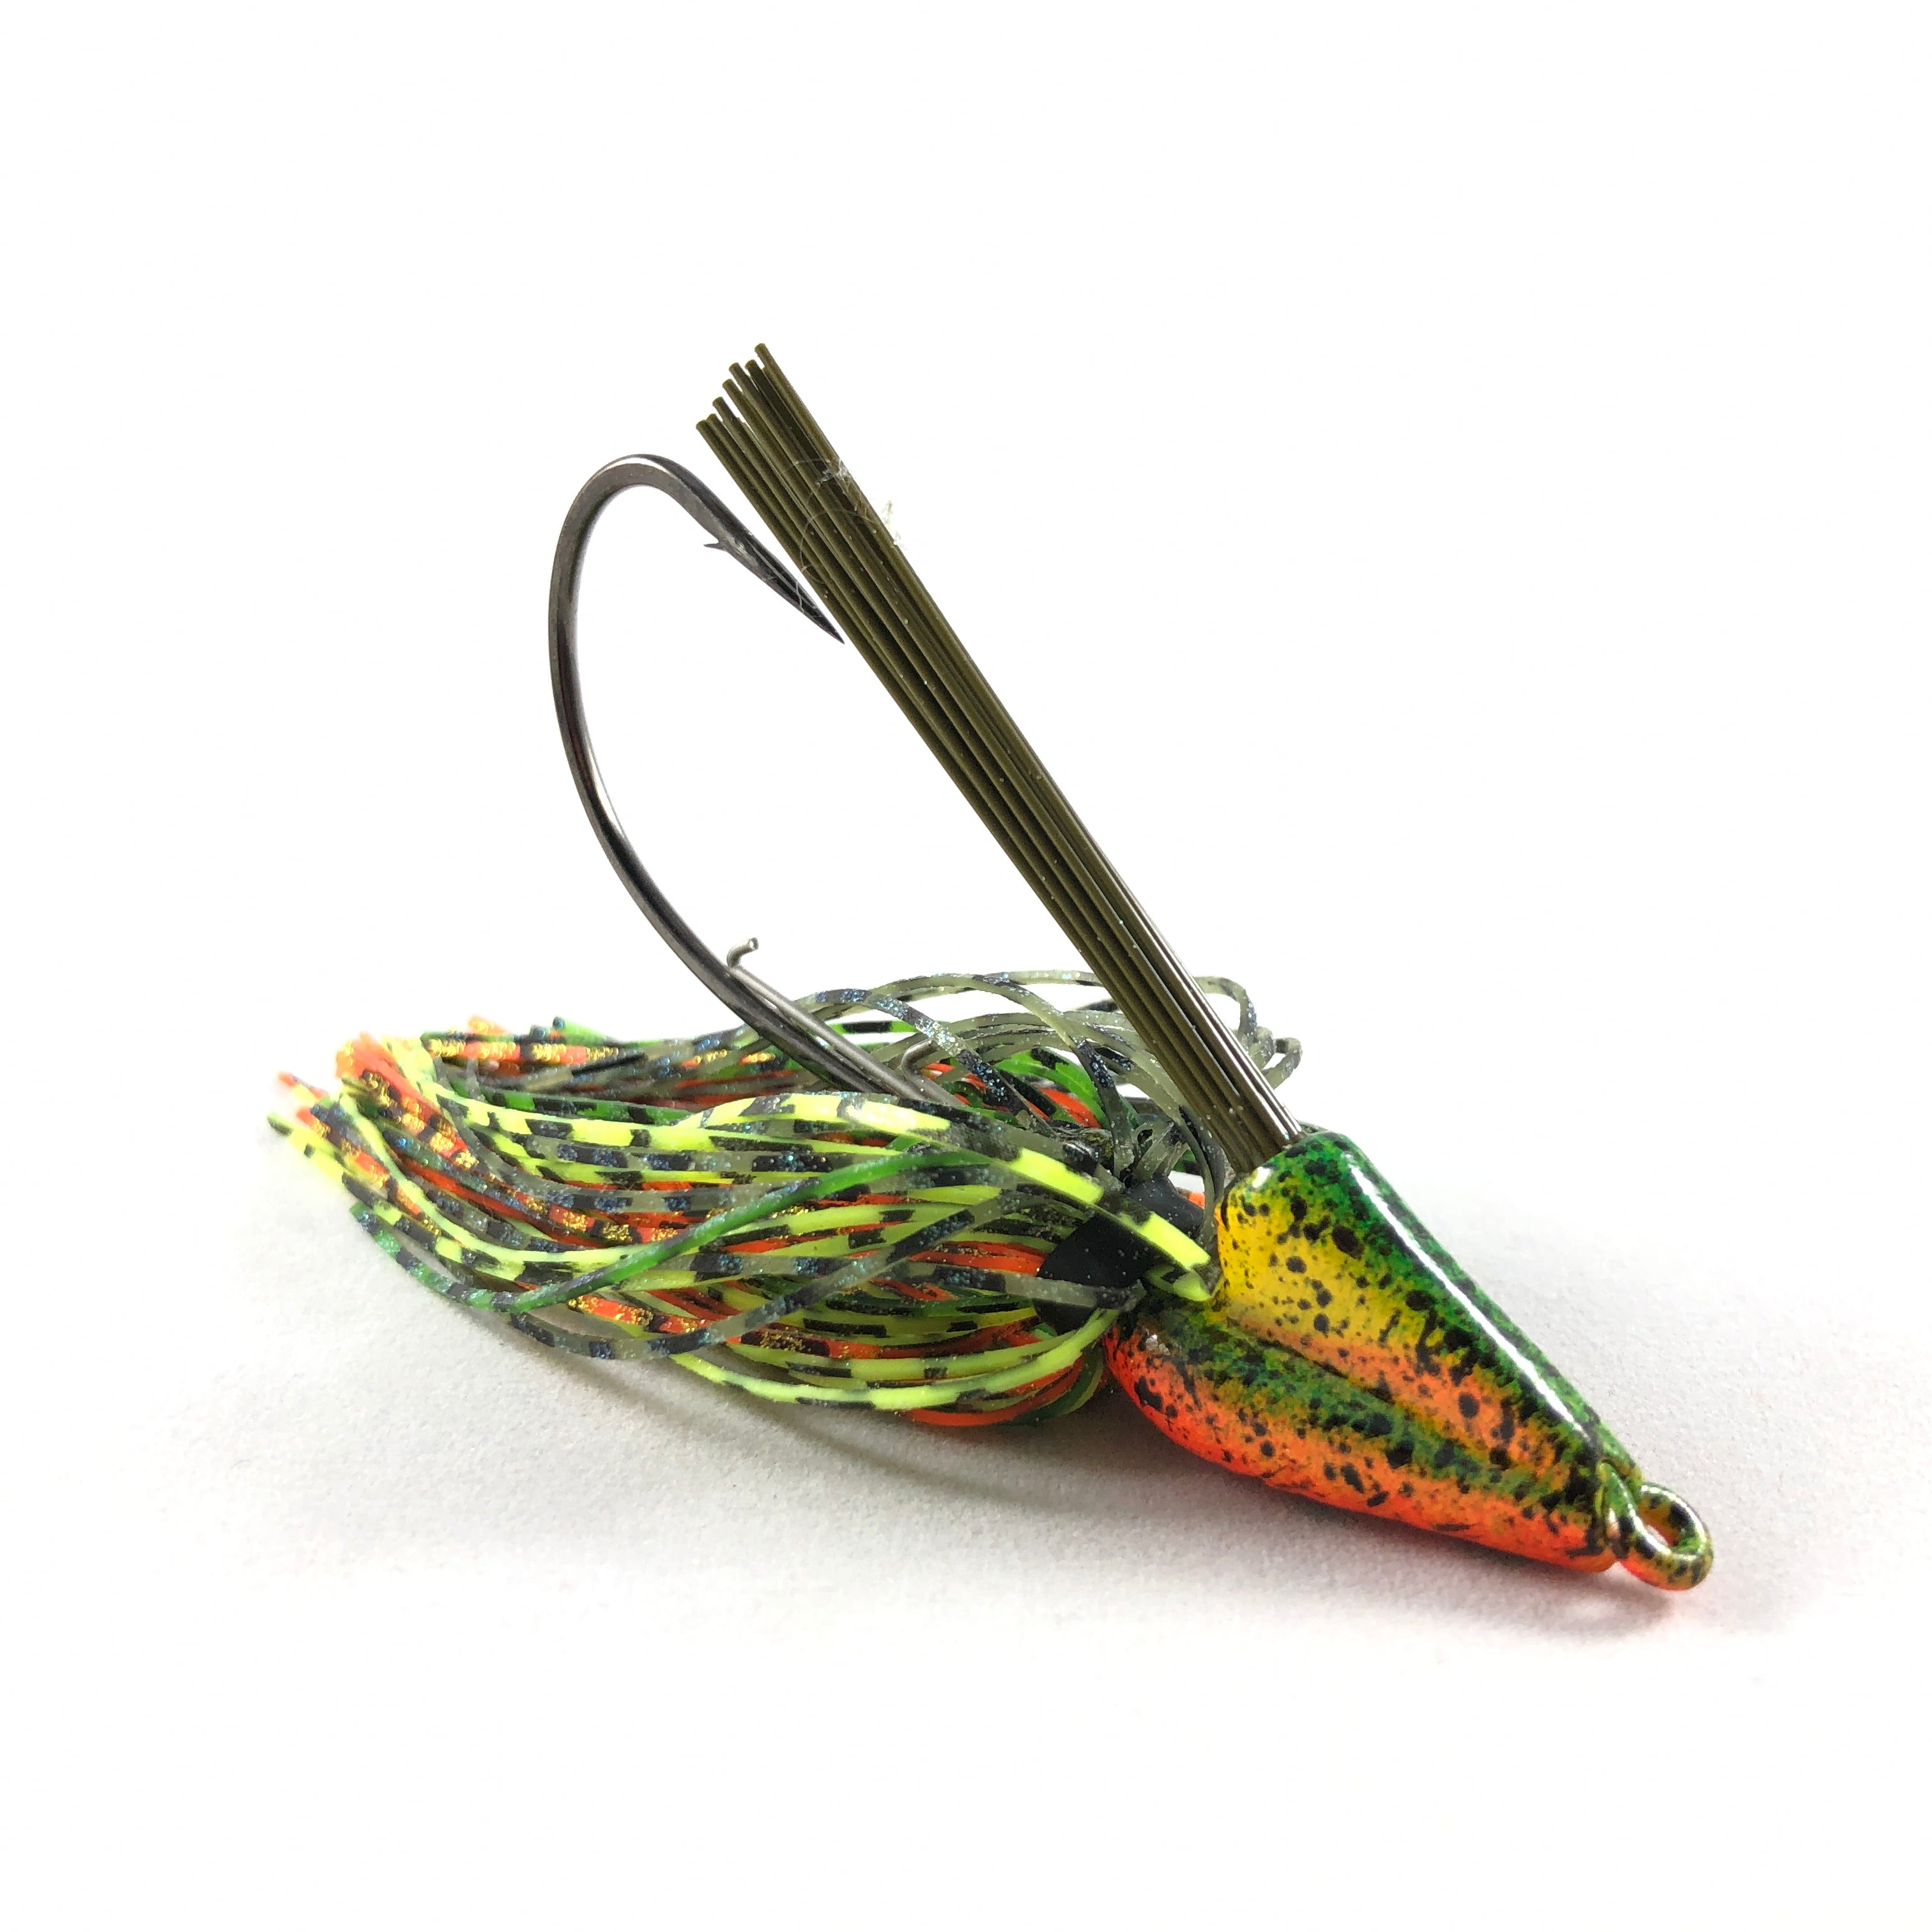 1/4 oz Black/Blue Craw Finesse Jig - The Perfect Jig